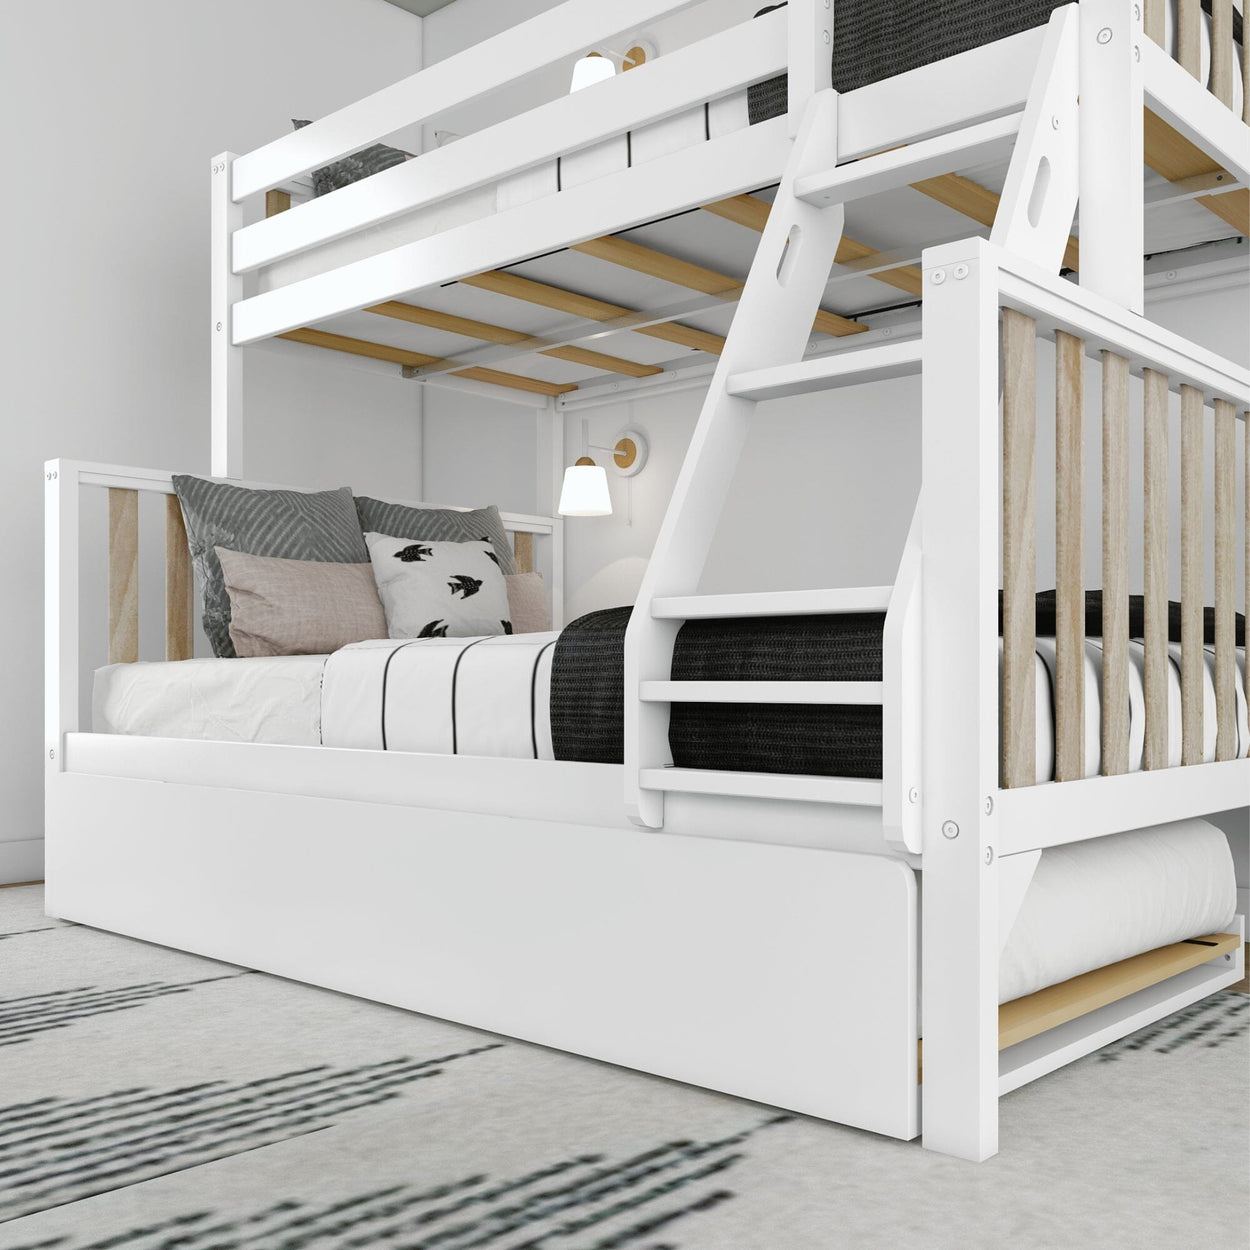 216231-202 : Bunk Beds Scandinavian Twin over Full Bunk Bed with Twin-Size Trundle, White/Blonde